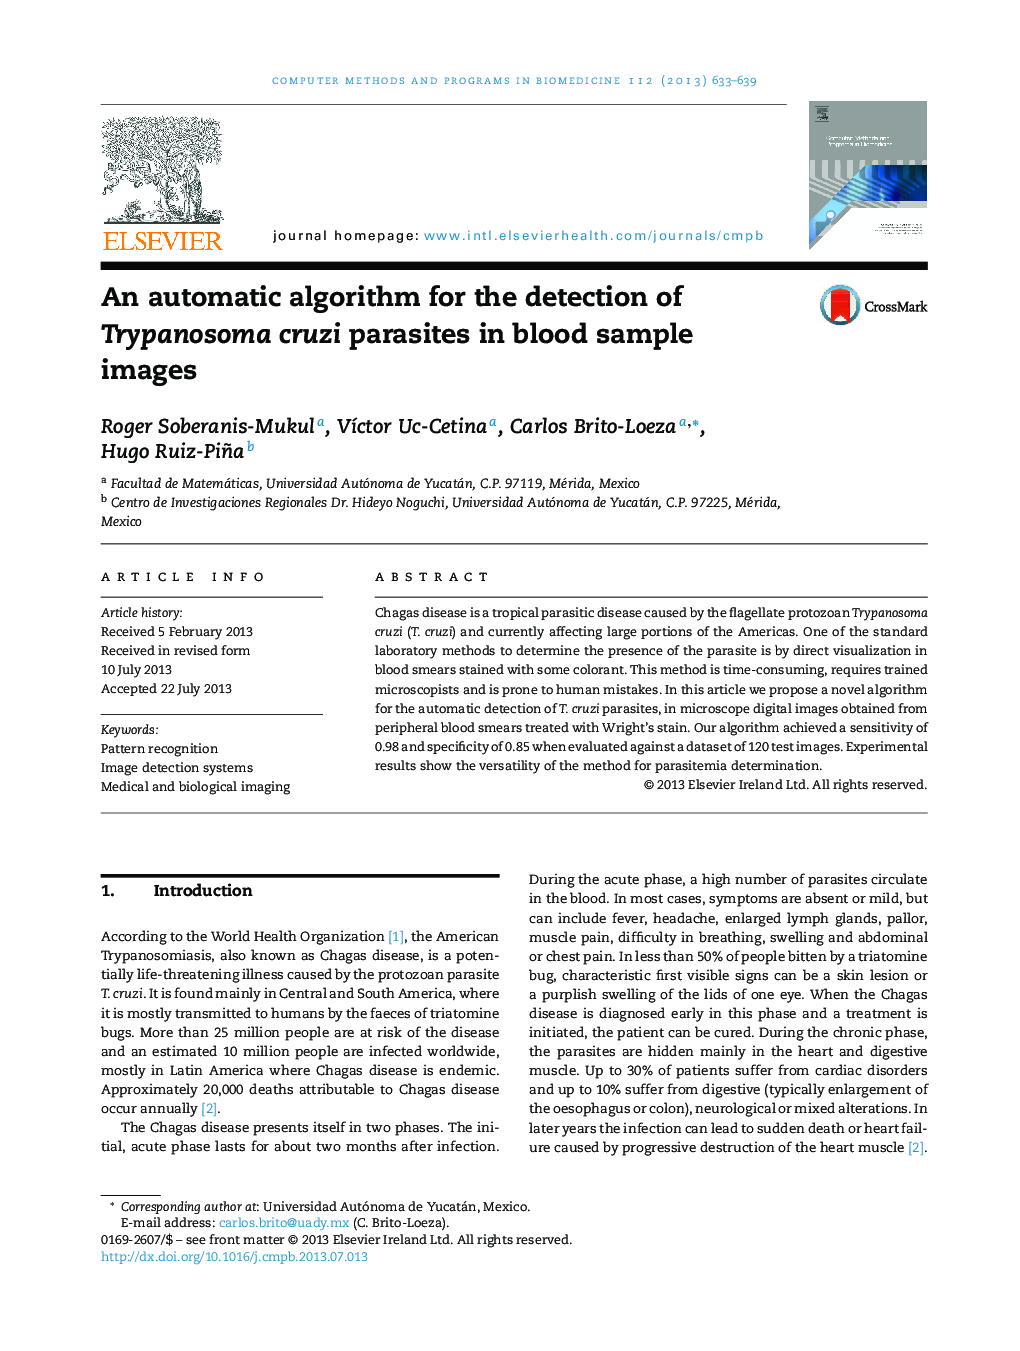 An automatic algorithm for the detection of Trypanosoma cruzi parasites in blood sample images